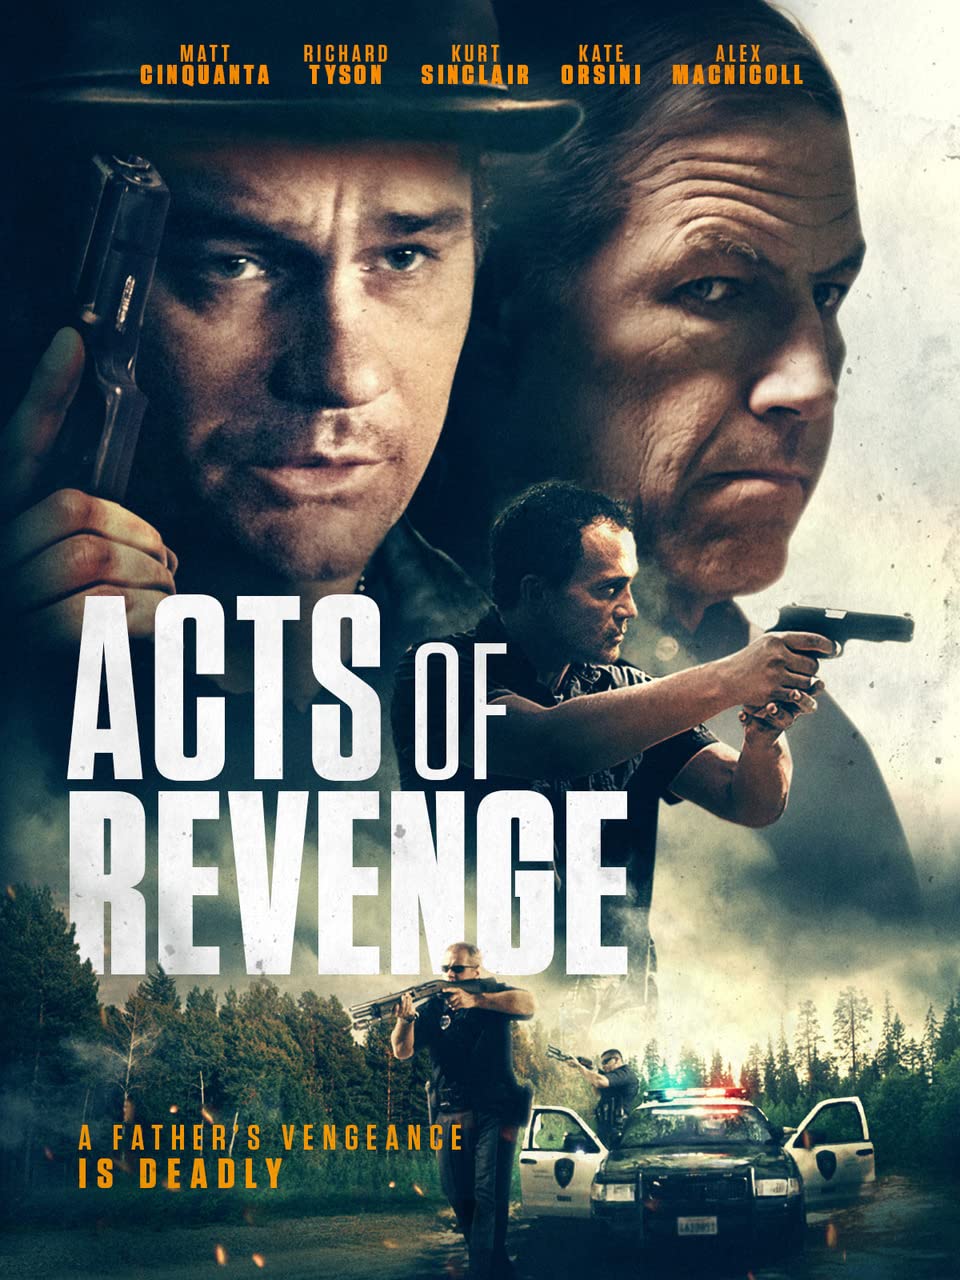 Download Acts of Revenge (2020) Full Movie Free